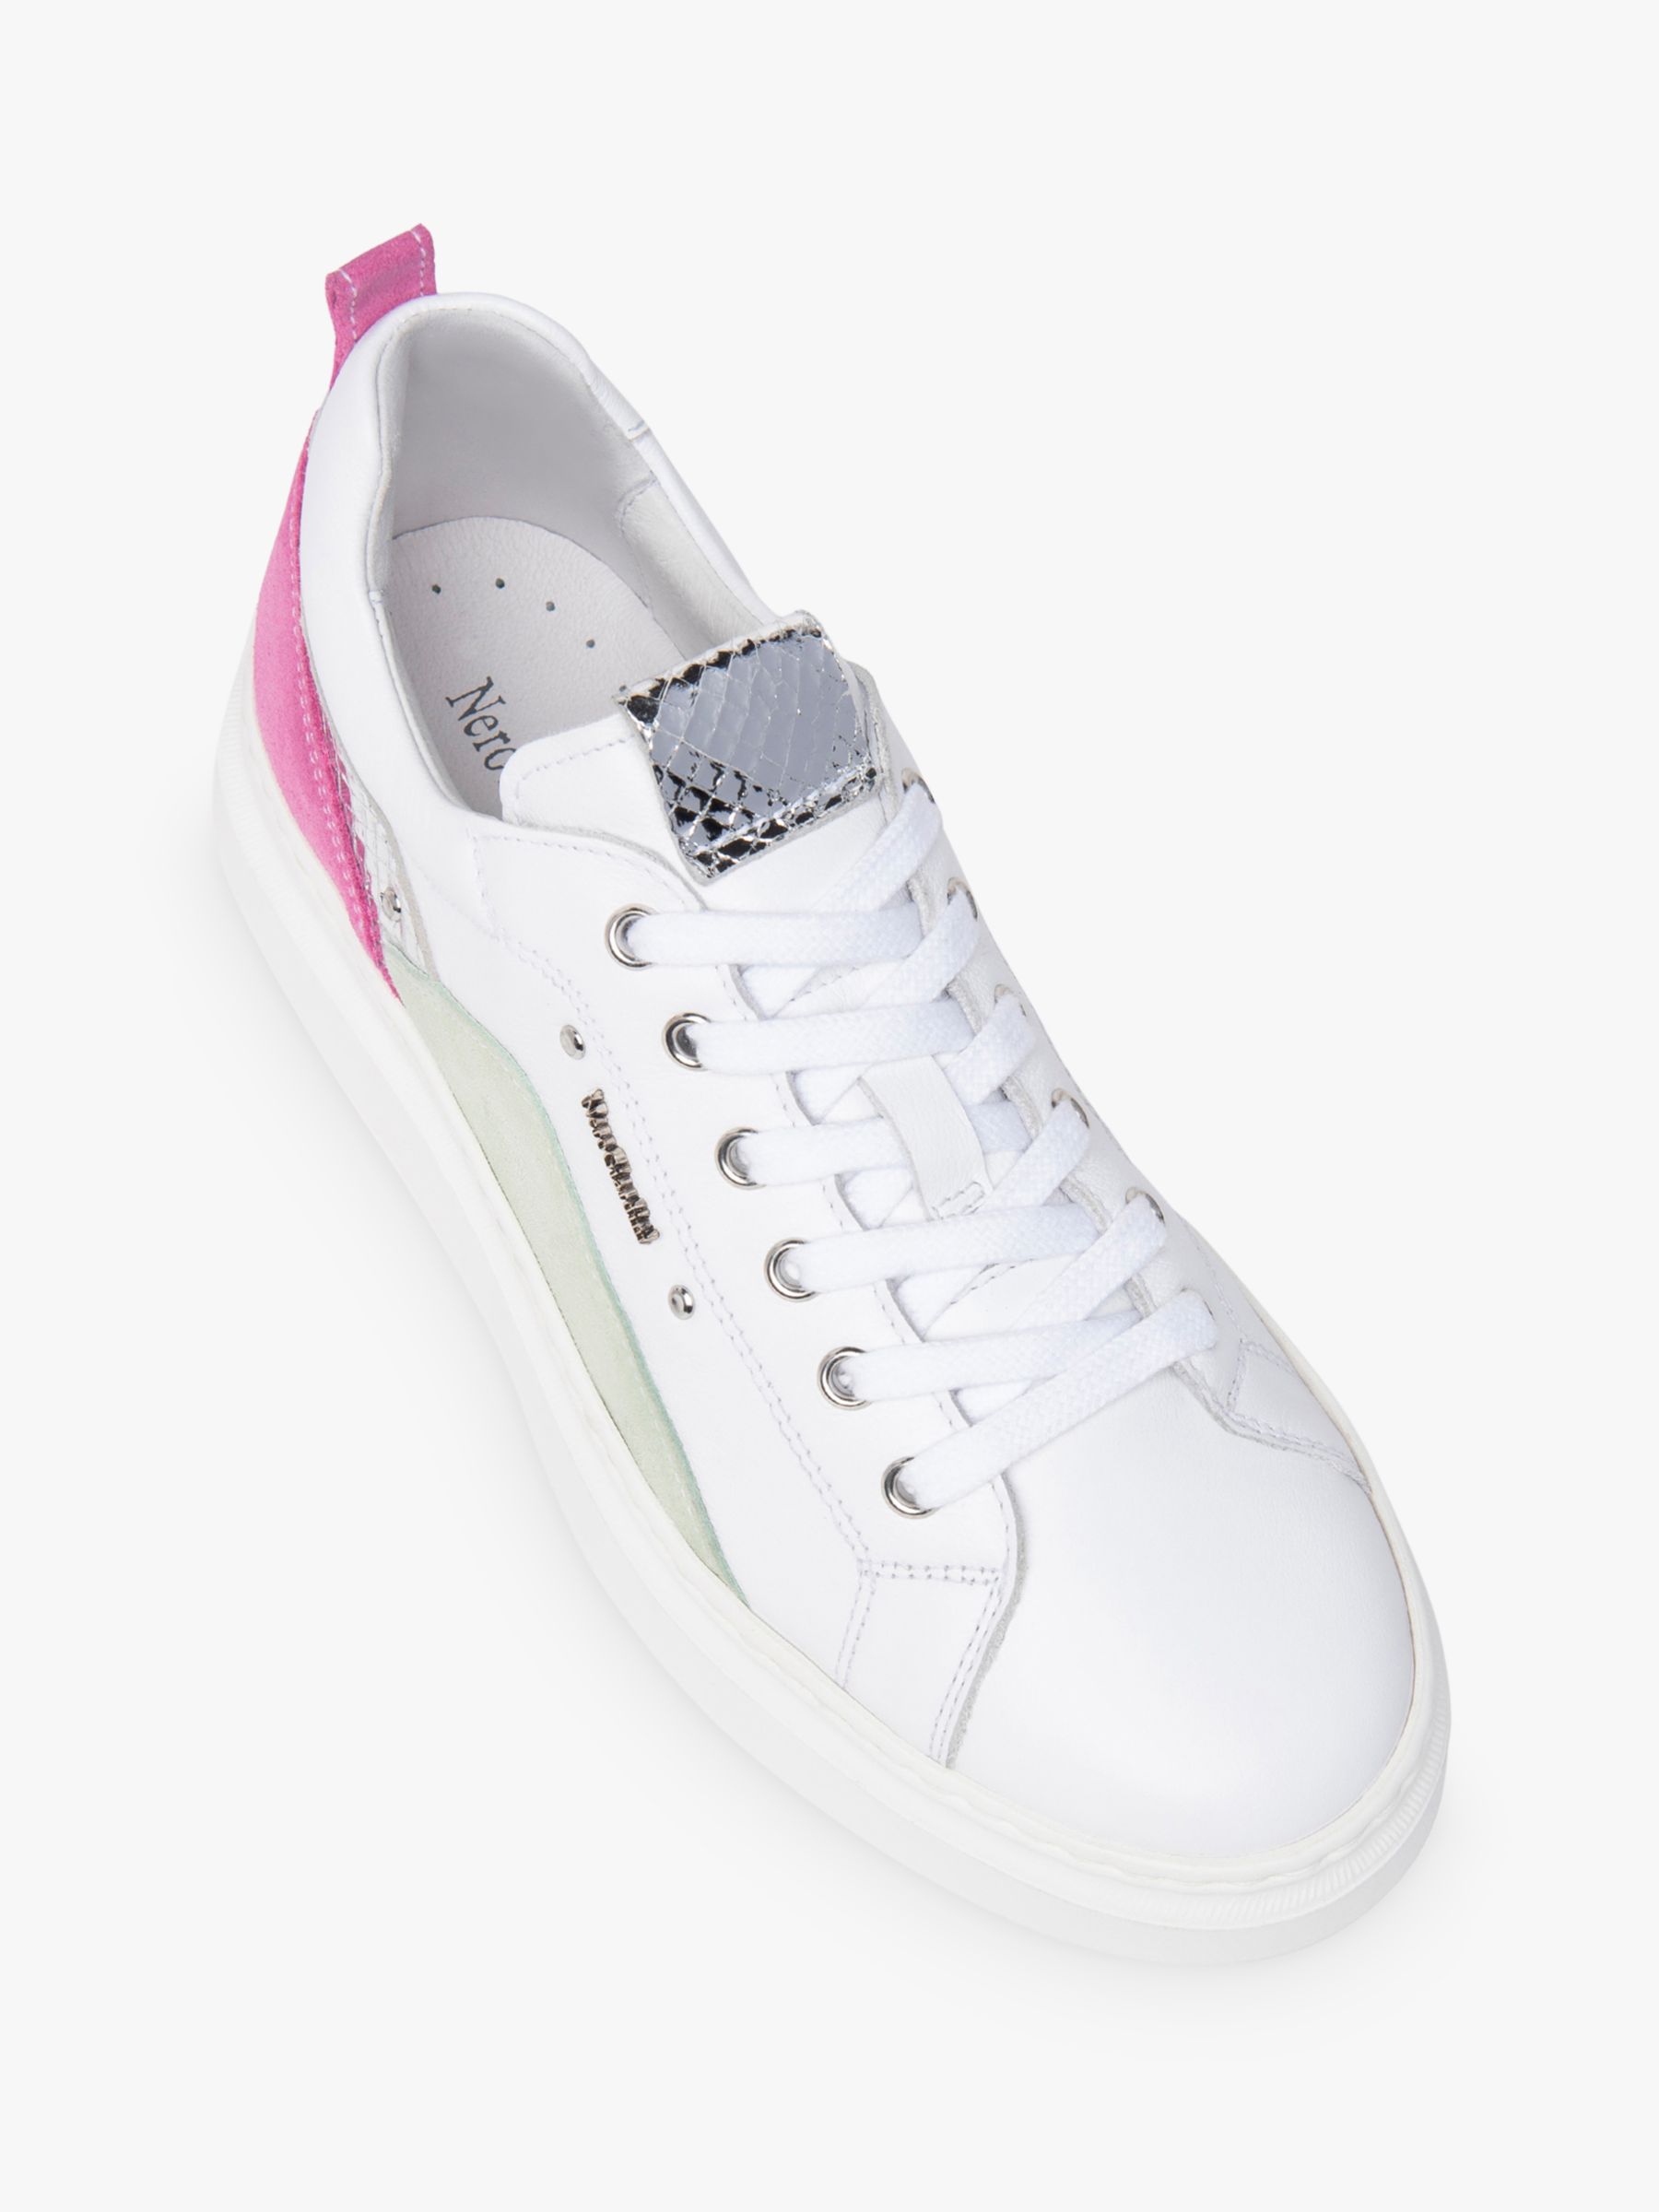 Buy NeroGiardini Leather Lace Up Trainers, White/Pink Online at johnlewis.com